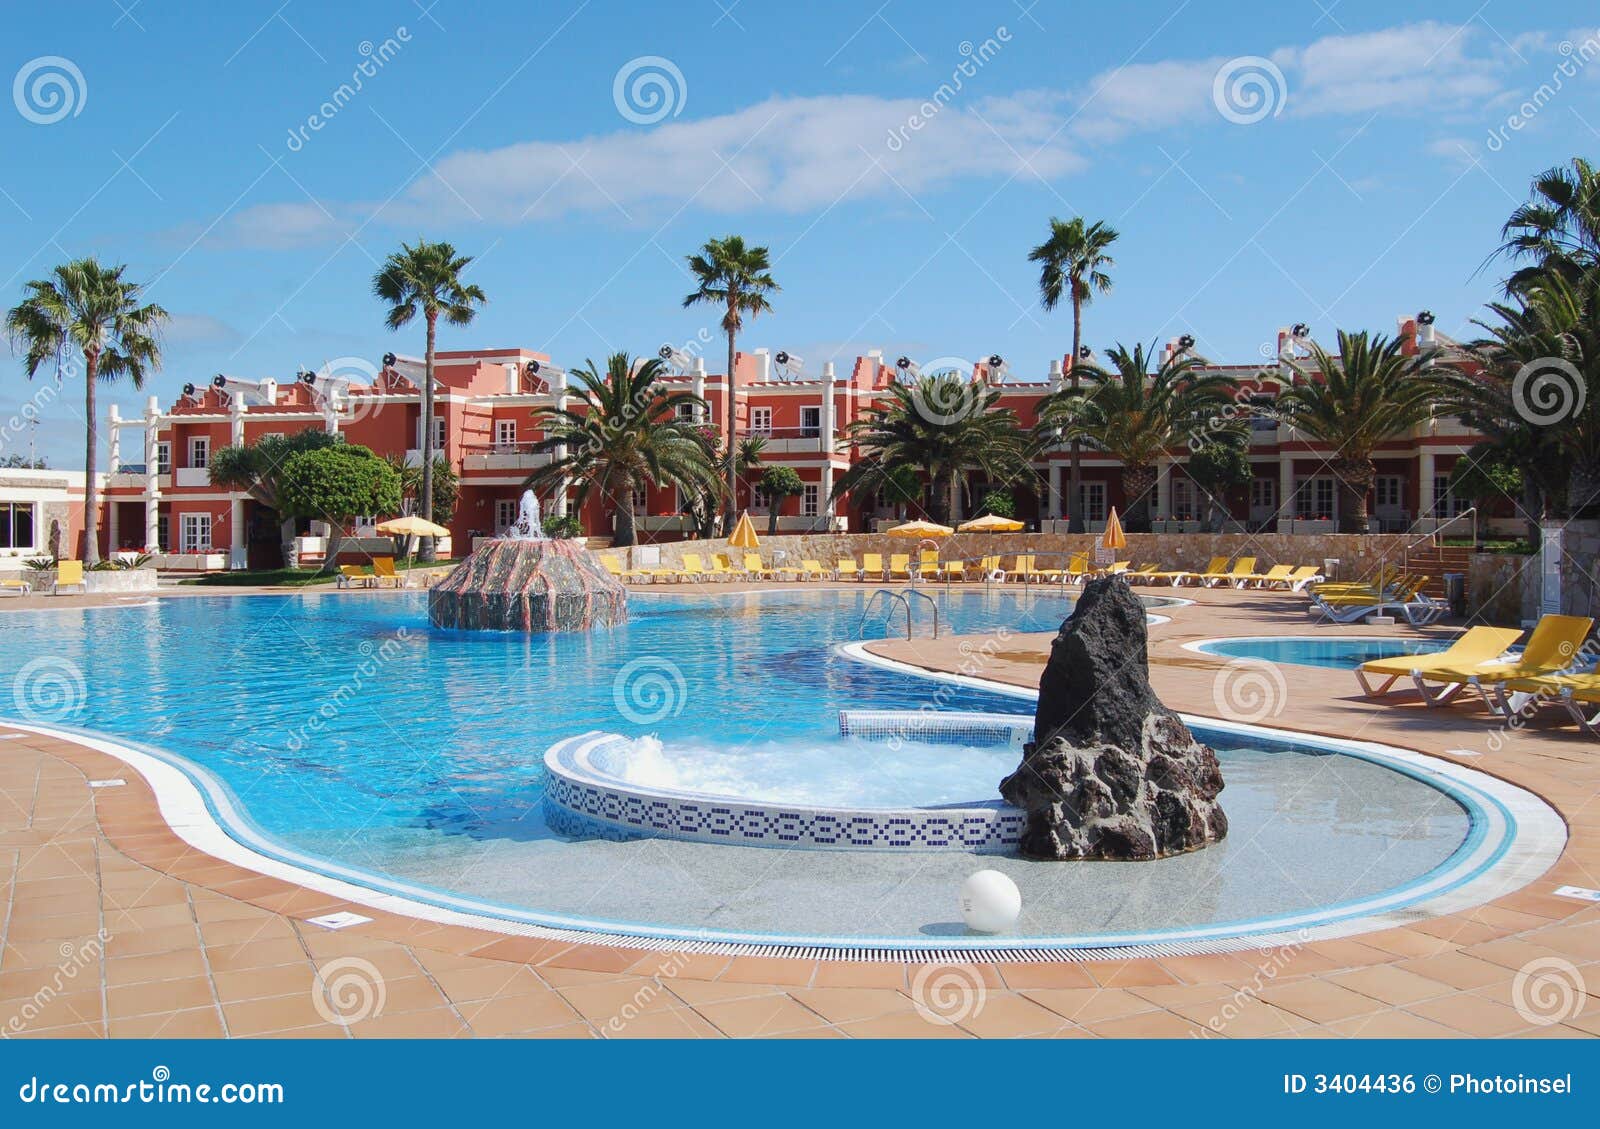 Hotel Pool Picture. Image: 3404436